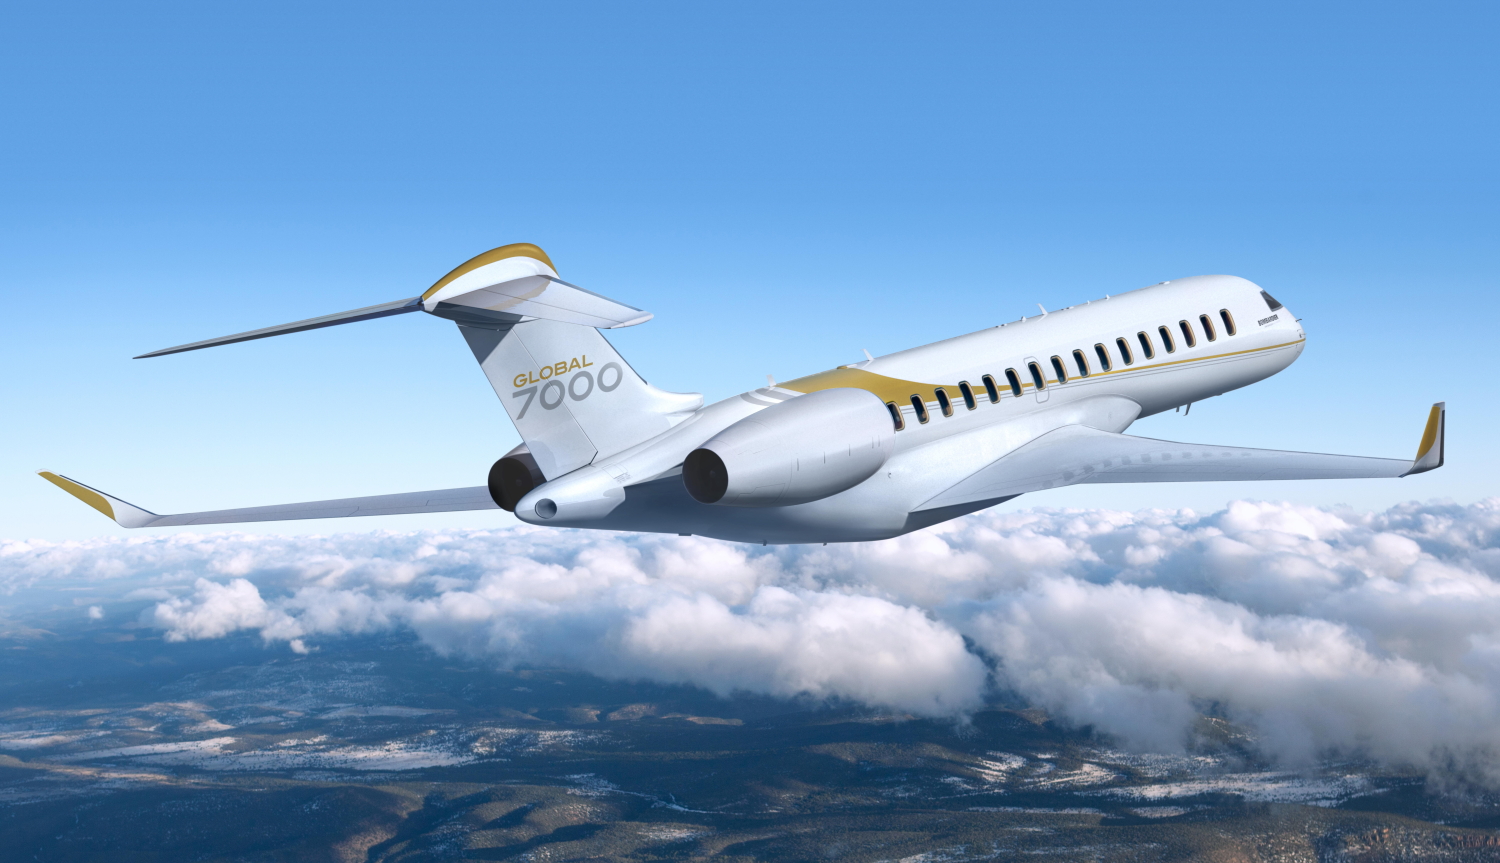 Bombardier Global 7000. Click to enlarge.